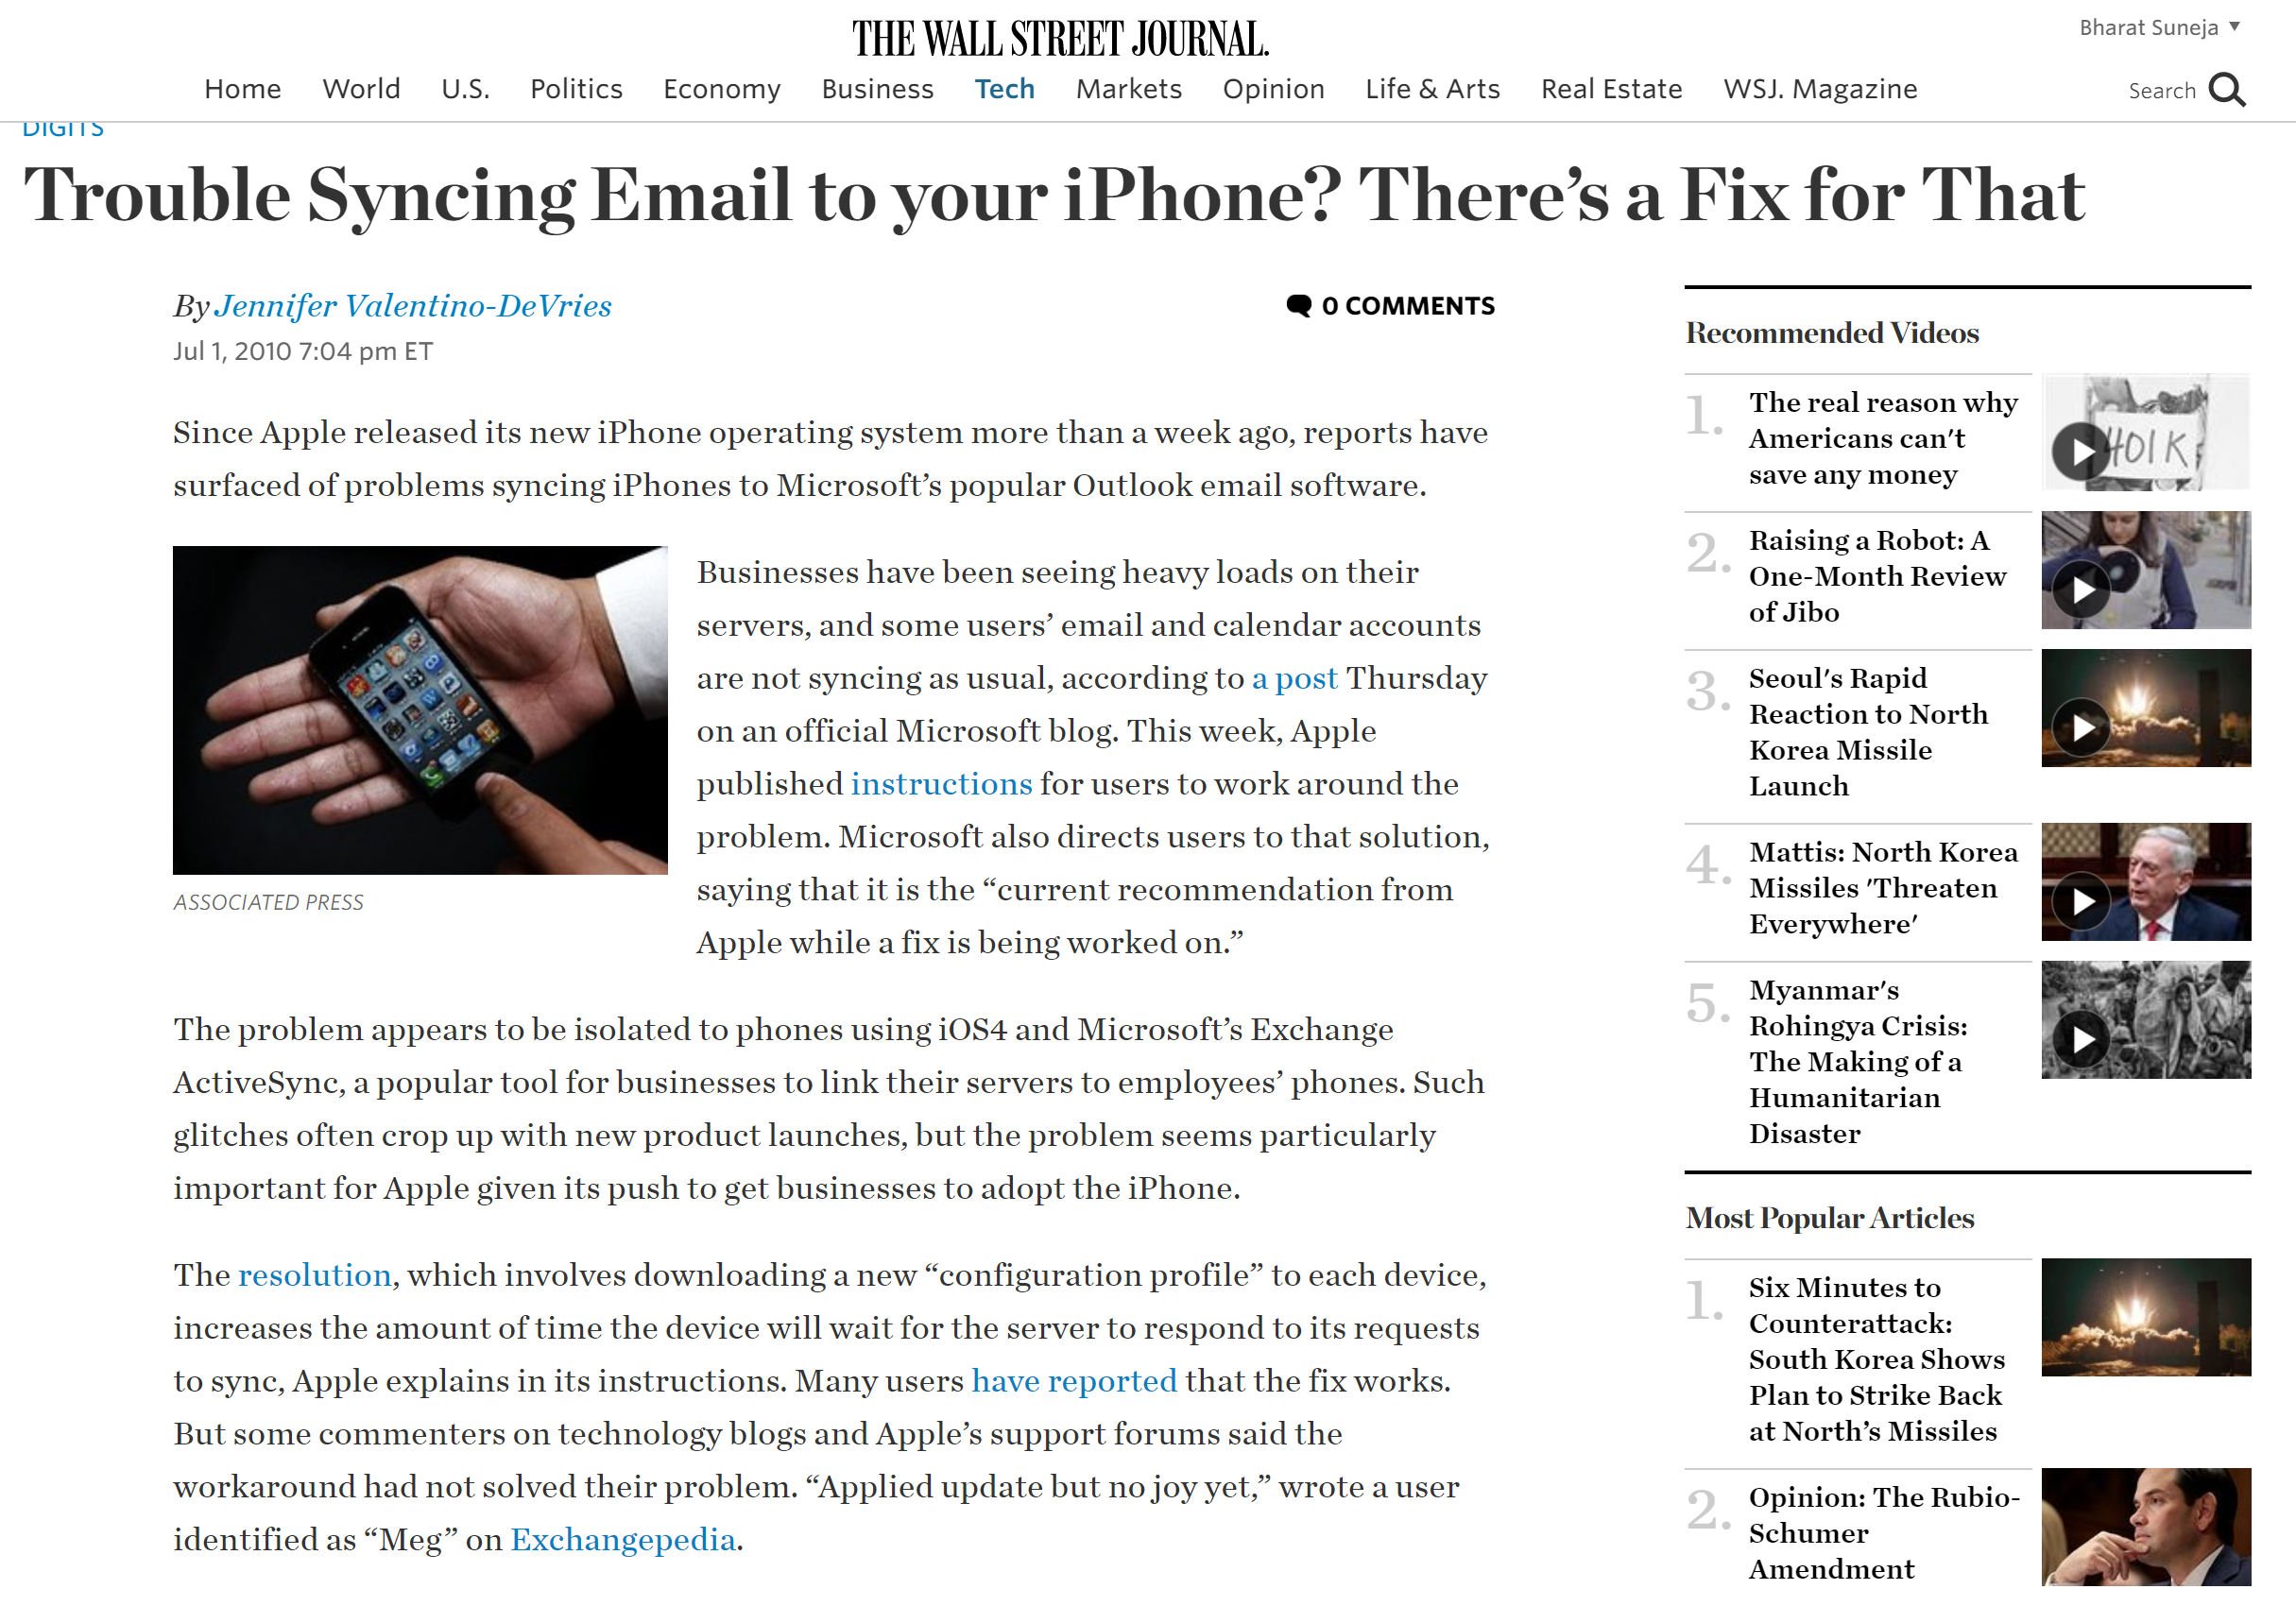 WSJ: Trouble Syncing Email to your iPhone? There’s a Fix for That